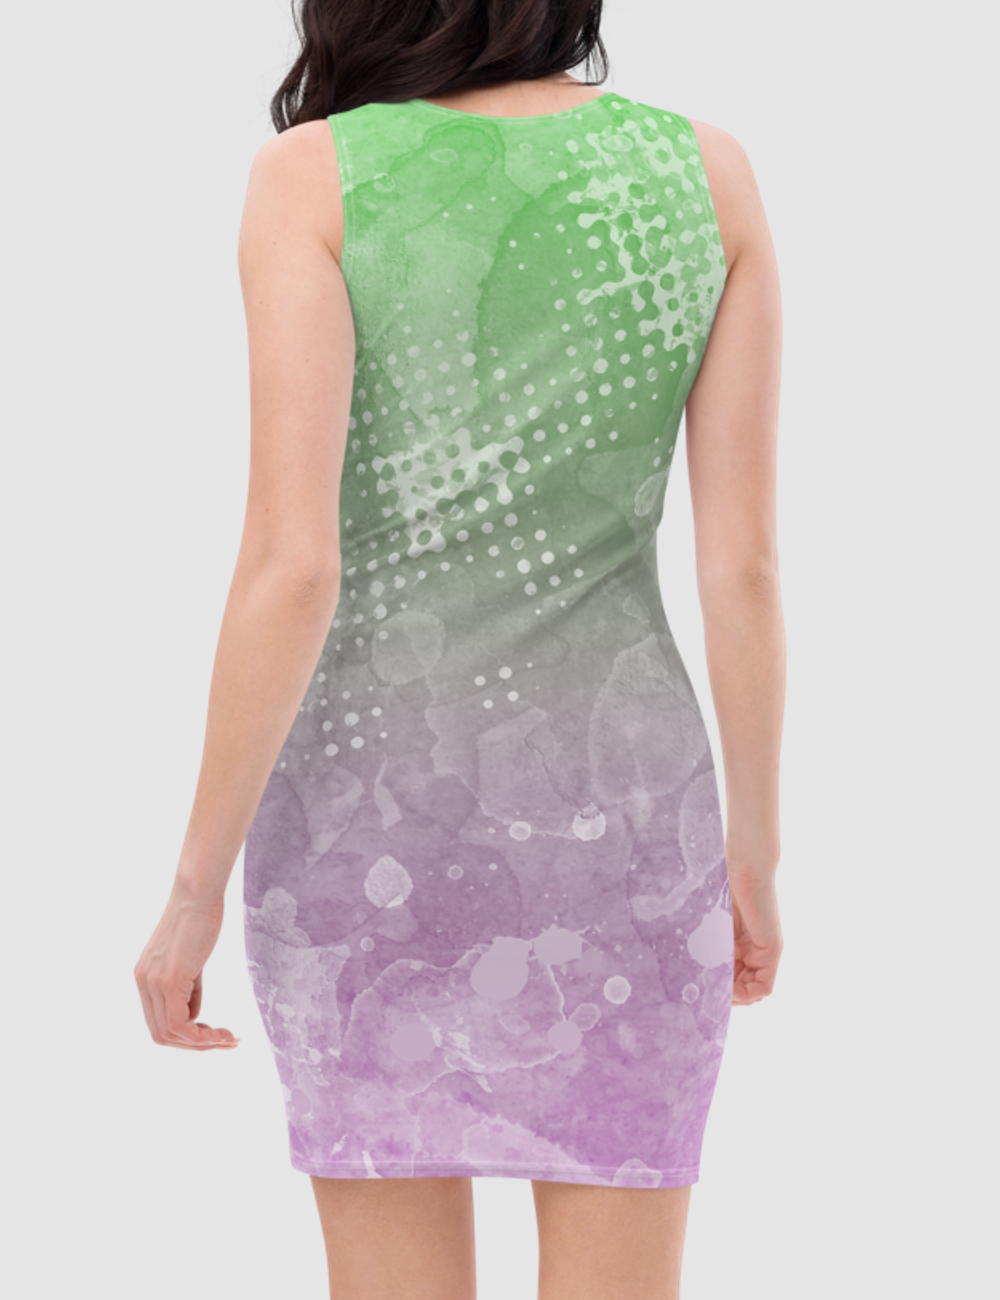 Mermaid Ombre | Women's Sleeveless Fitted Sublimated Dress OniTakai